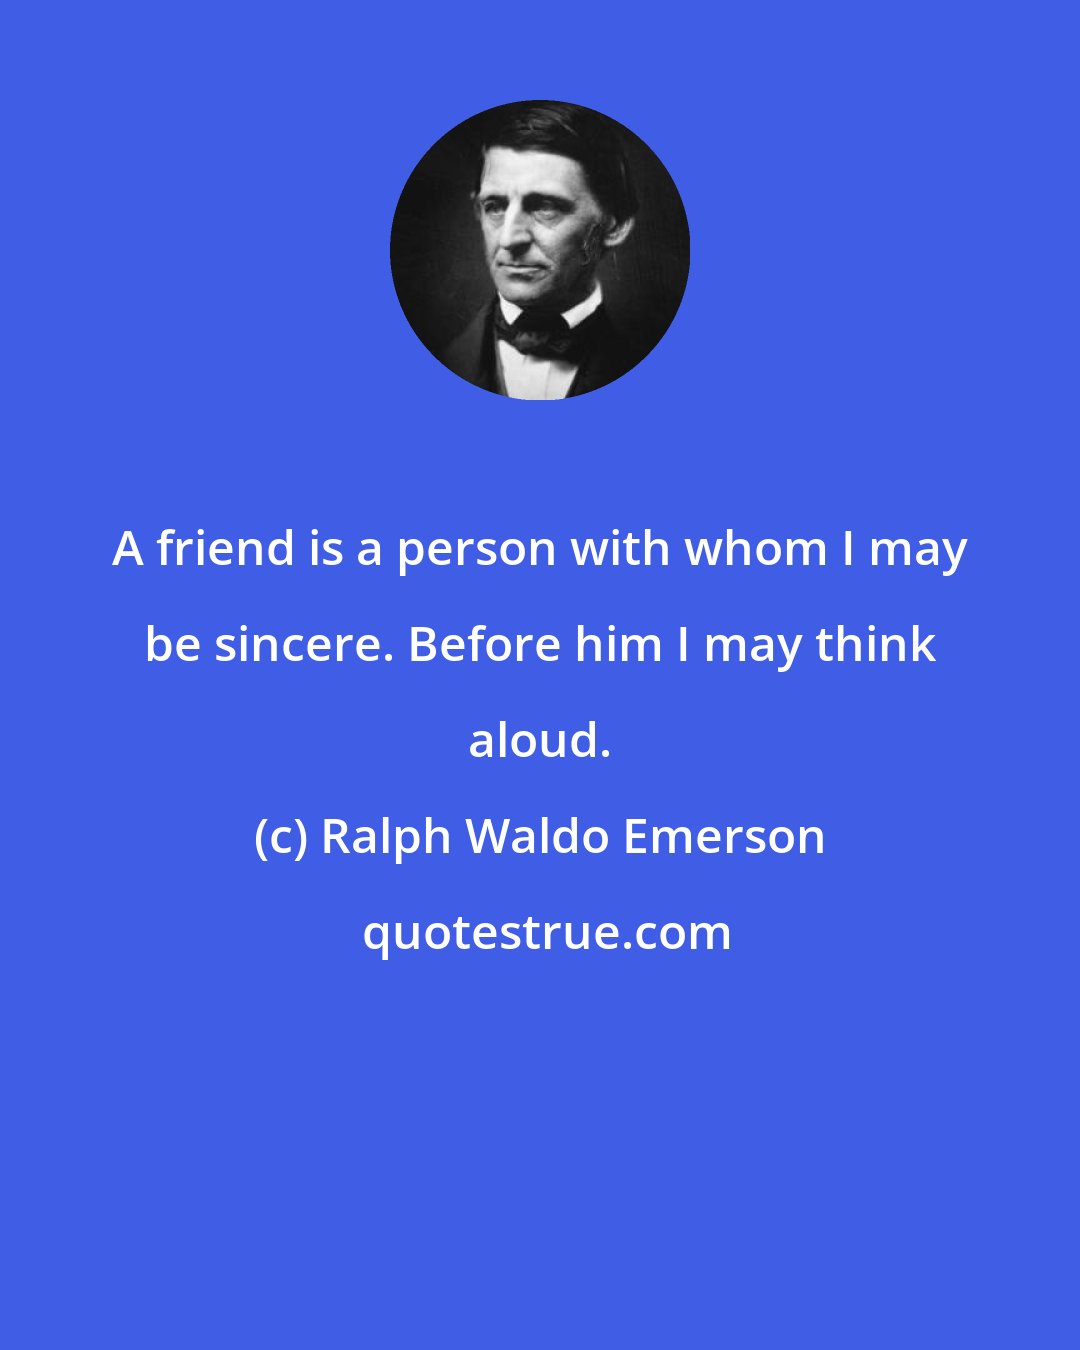 Ralph Waldo Emerson: A friend is a person with whom I may be sincere. Before him I may think aloud.